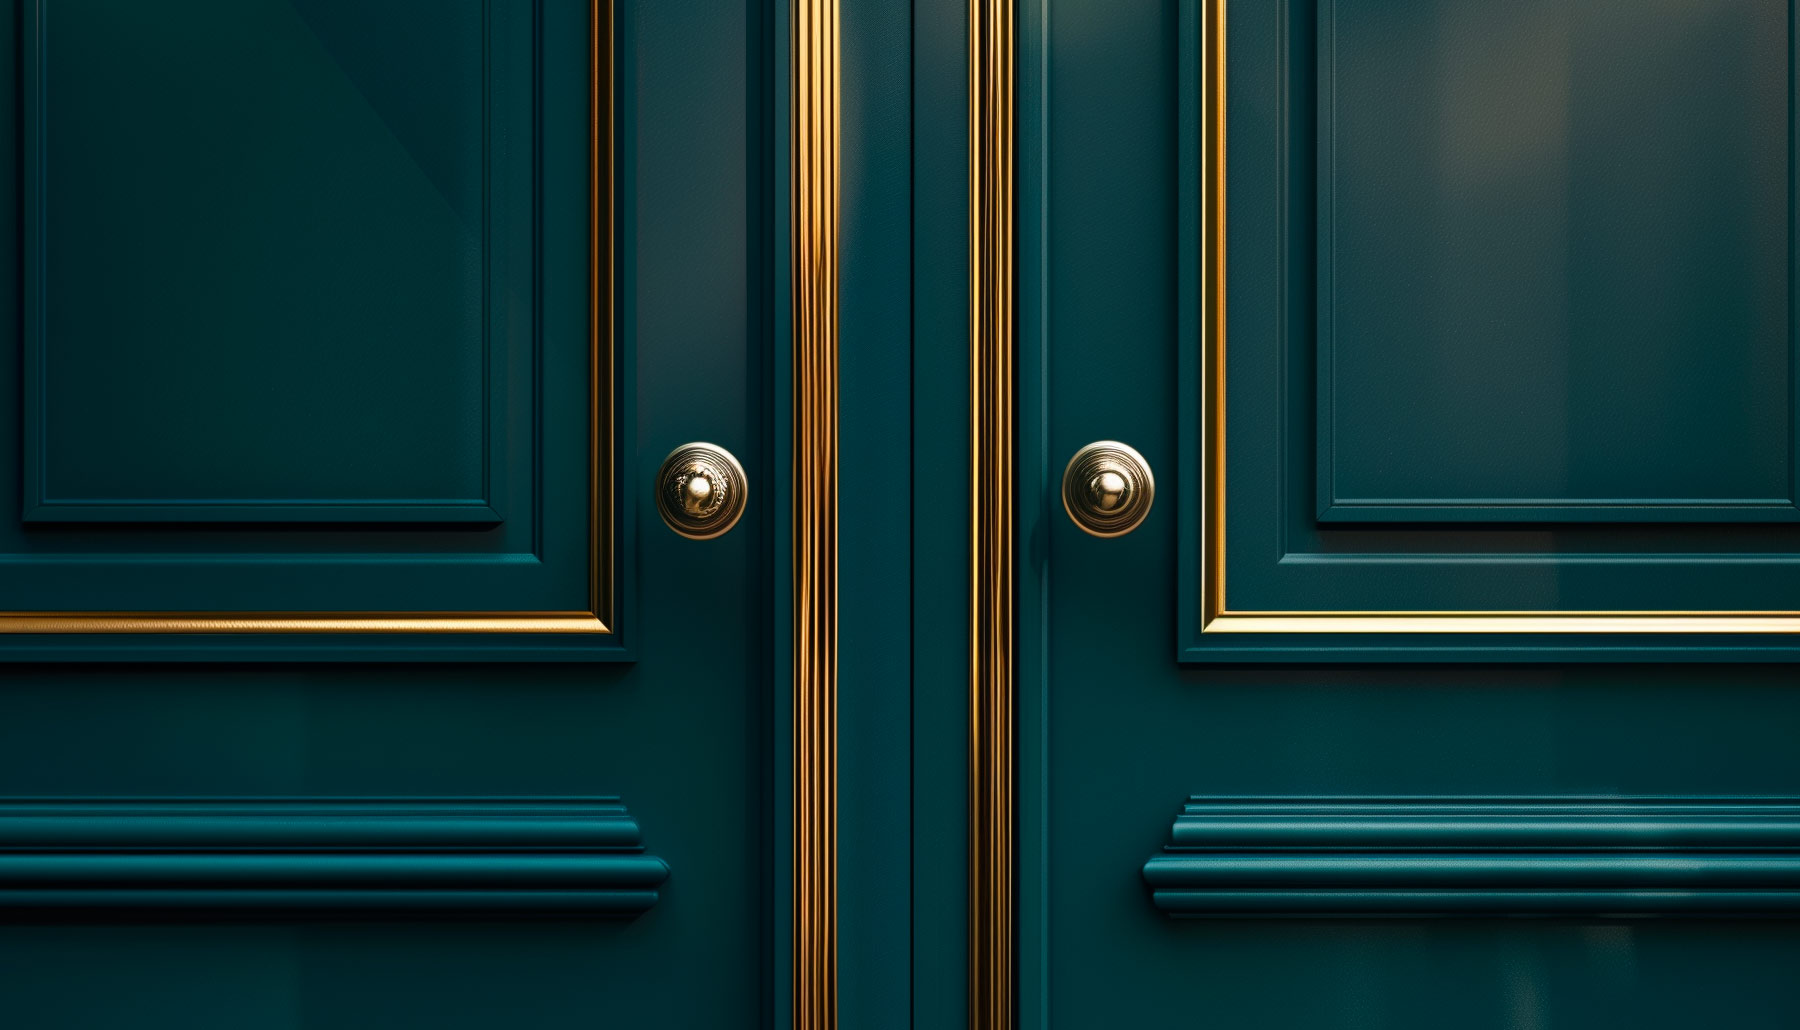 Abstract representation of the doors to real estate crowdfunding success